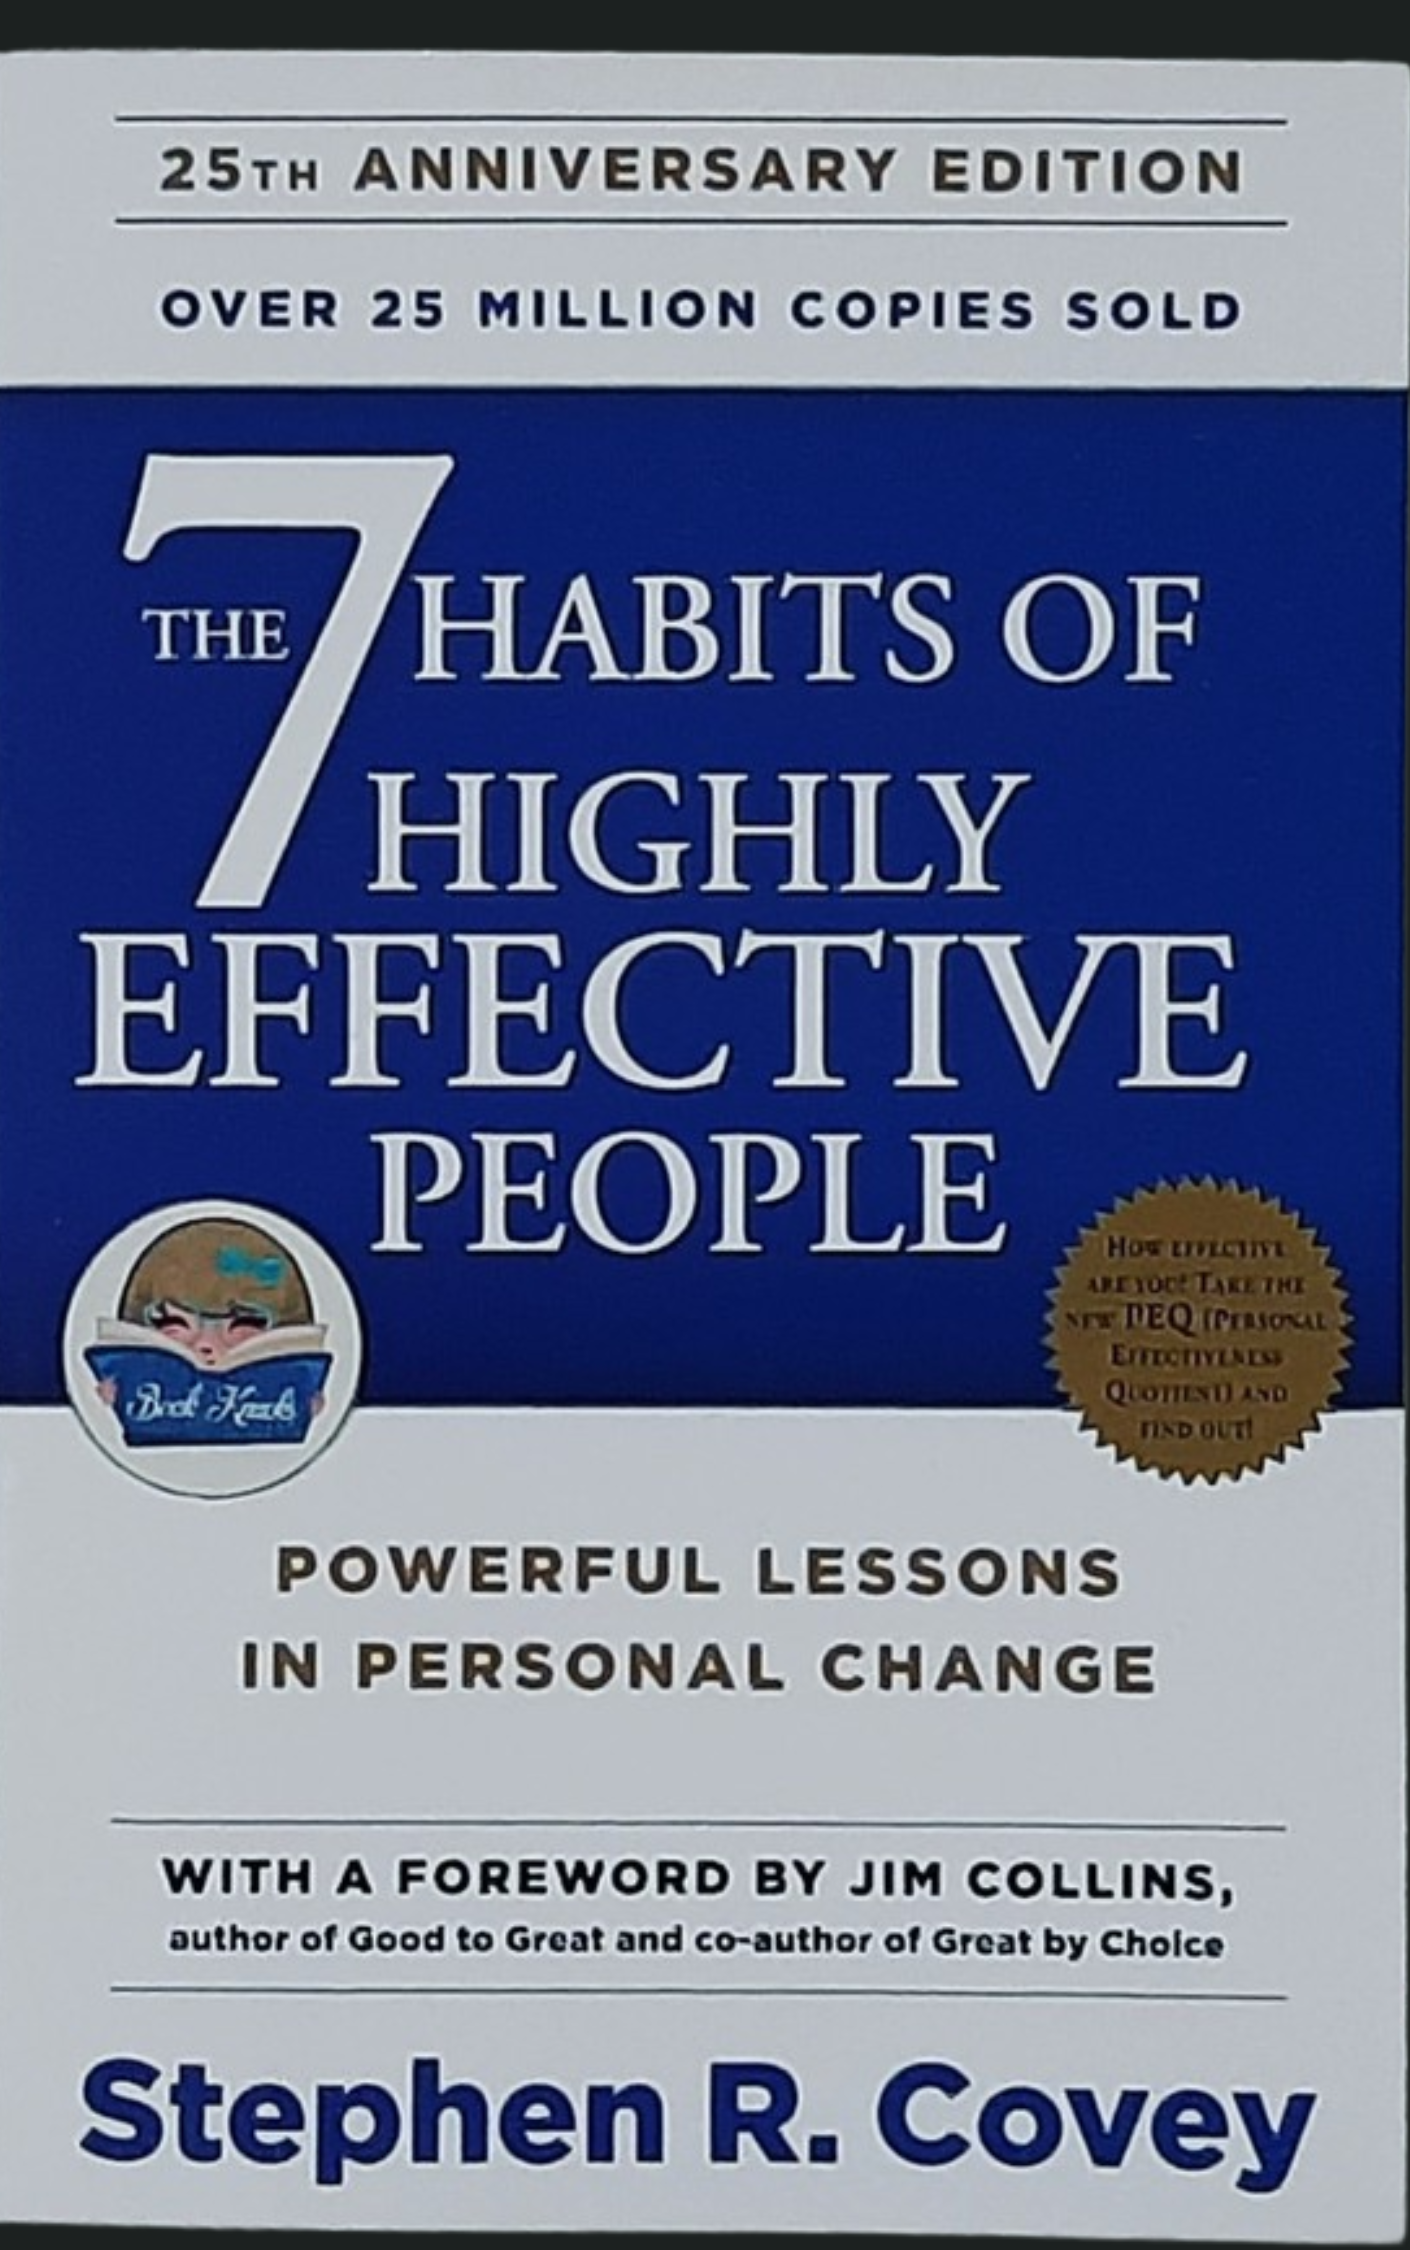 THE 7 HABITS OF HIGHLY EFFECTIVE PEOPLE by STEPHEN COVEY